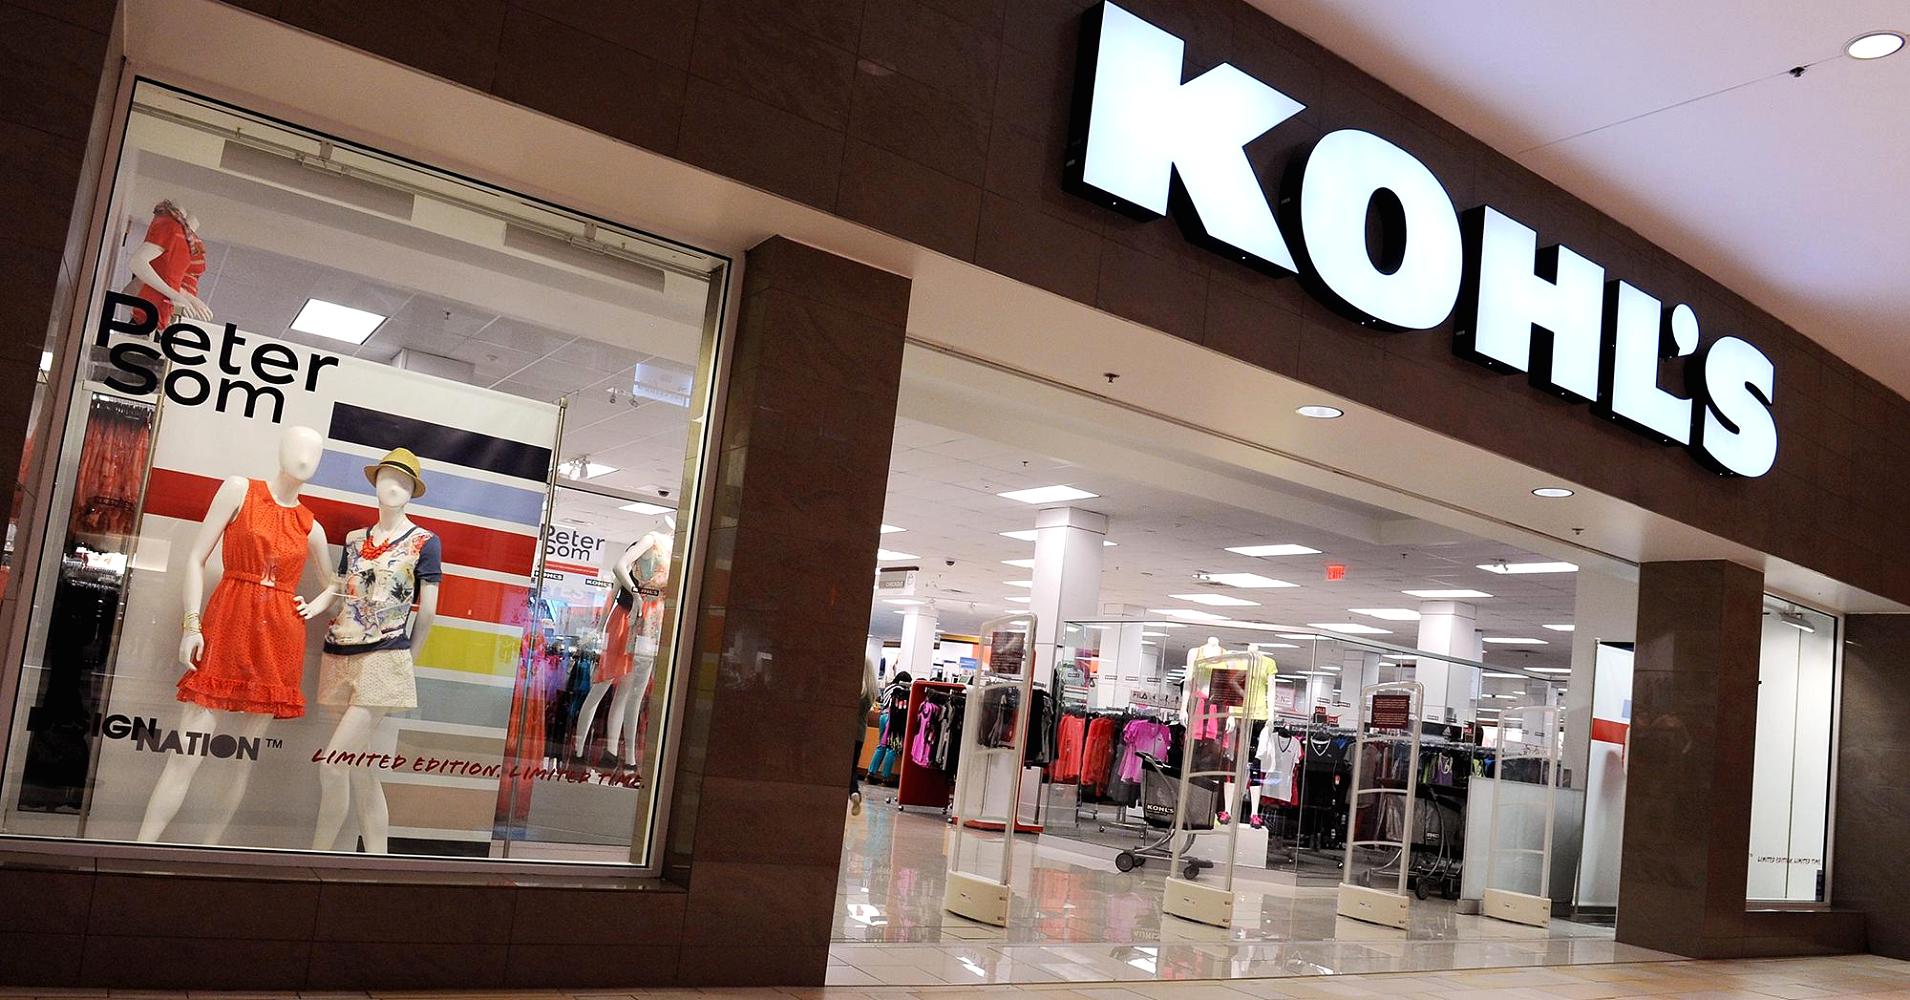 Could Mini Kolhs Stores Start Popping Up?